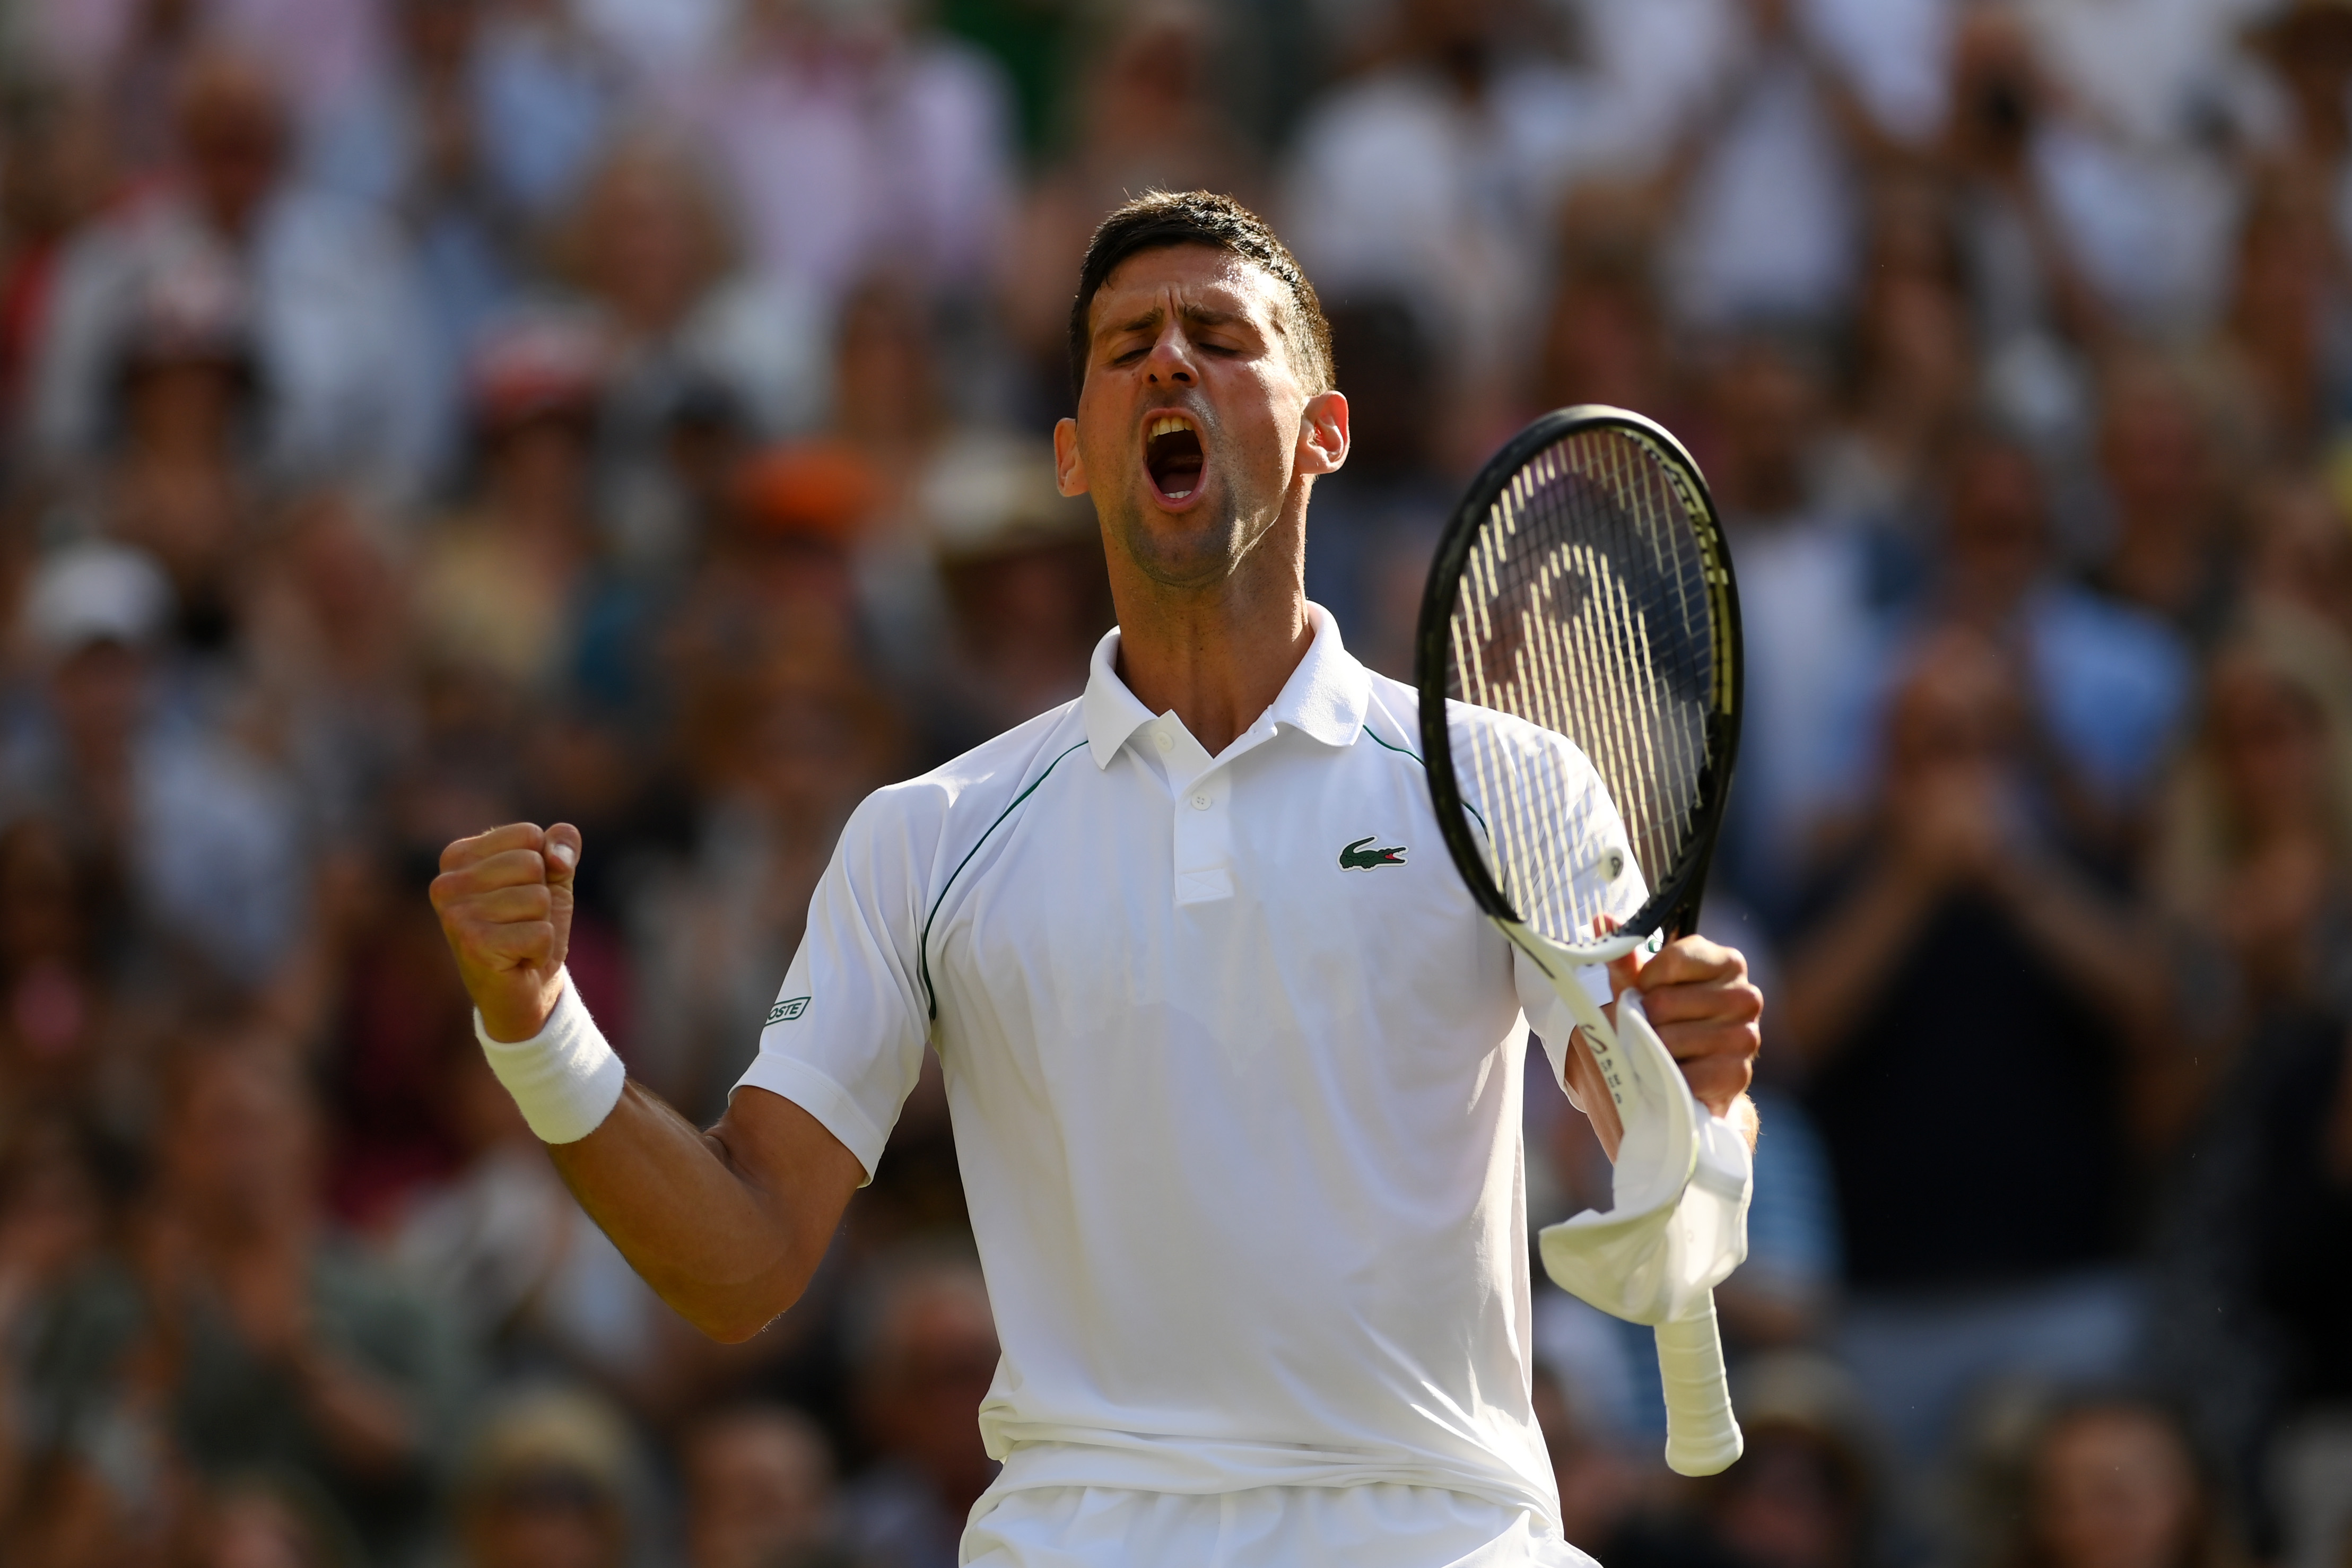 Novak Djokovic of Serbia celebrates match point against Cameron Norrie of Great Britain during the Mens’ Singles Semi Final match on day twelve of The Championships Wimbledon 2022 at All England Lawn Tennis and Croquet Club on July 08, 2022 in London, England.